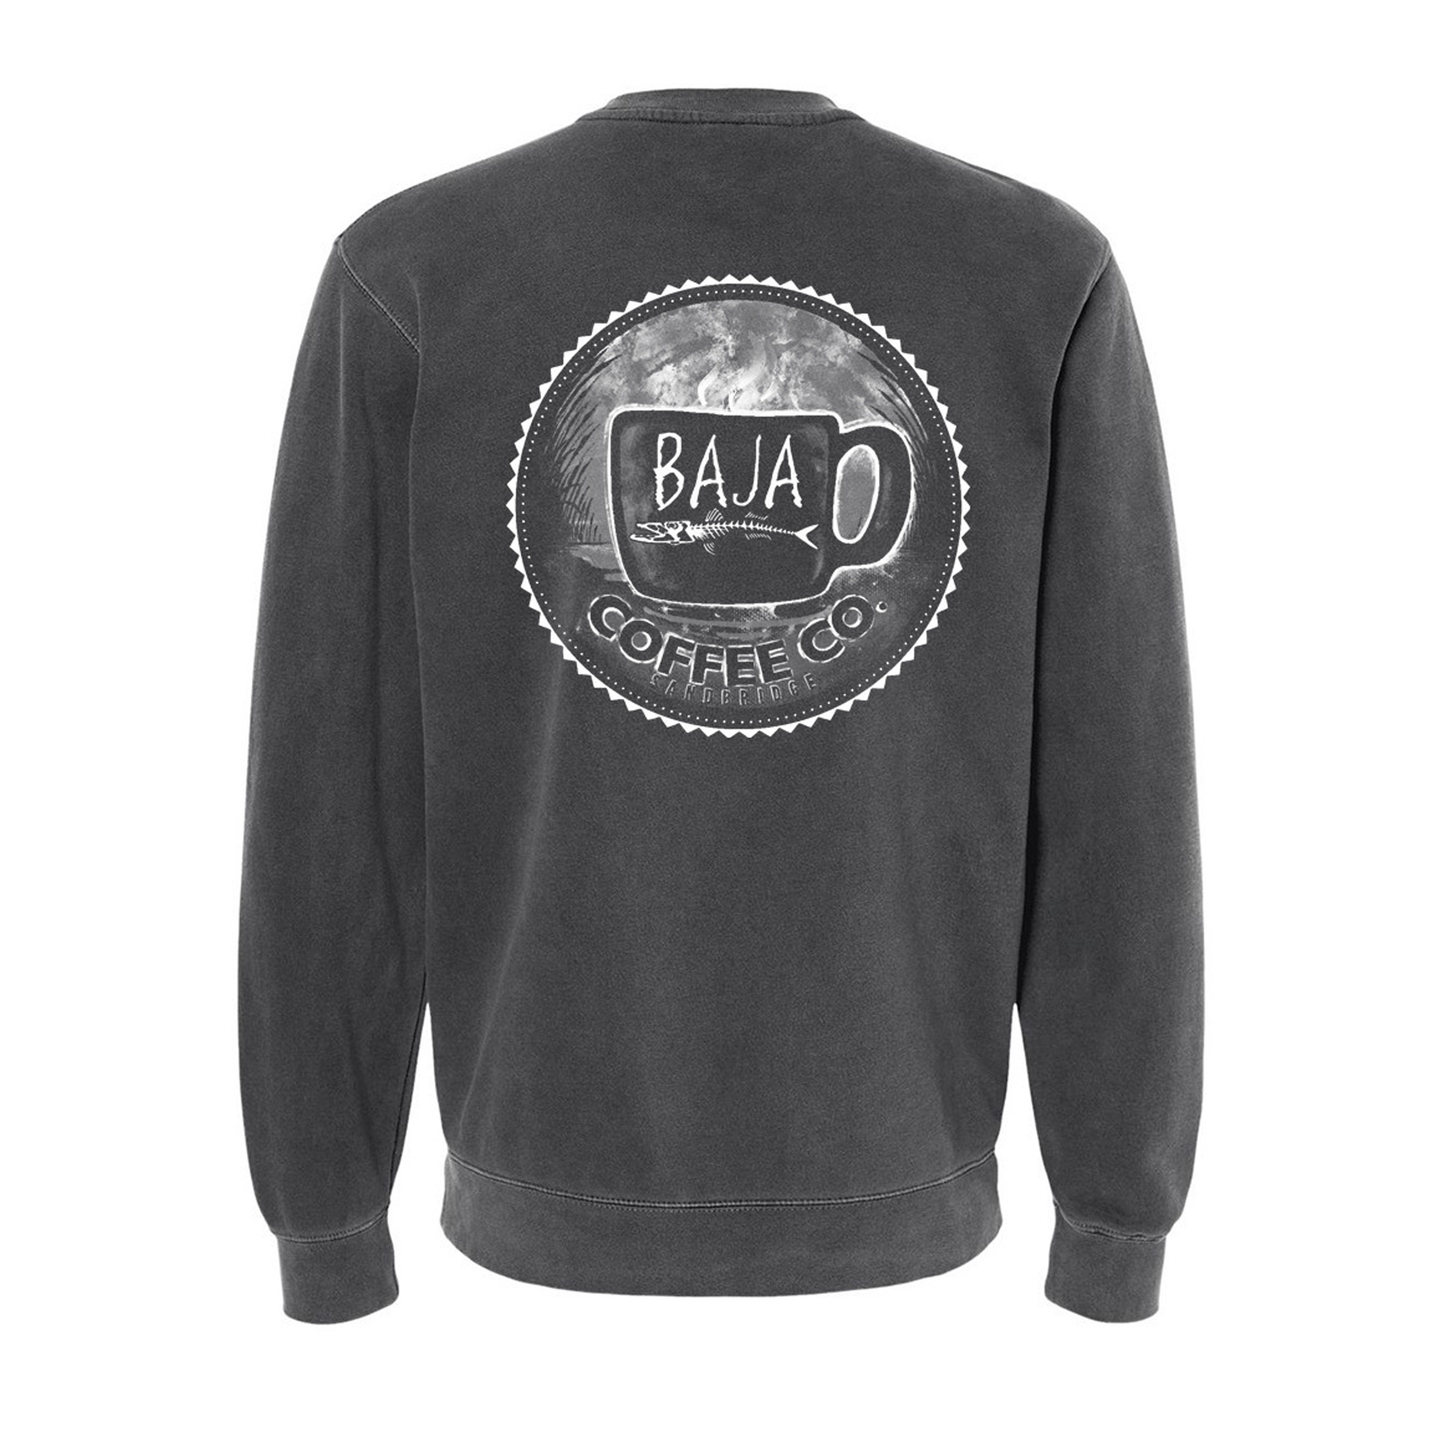 Baja Coffee Company (White, Stacked, Pocket) & Grayscale Emblem (Back) - Independent Trading Co. - Midweight Pigment-Dyed Crewneck Sweatshirt - PRM3500 (Pigment Black)